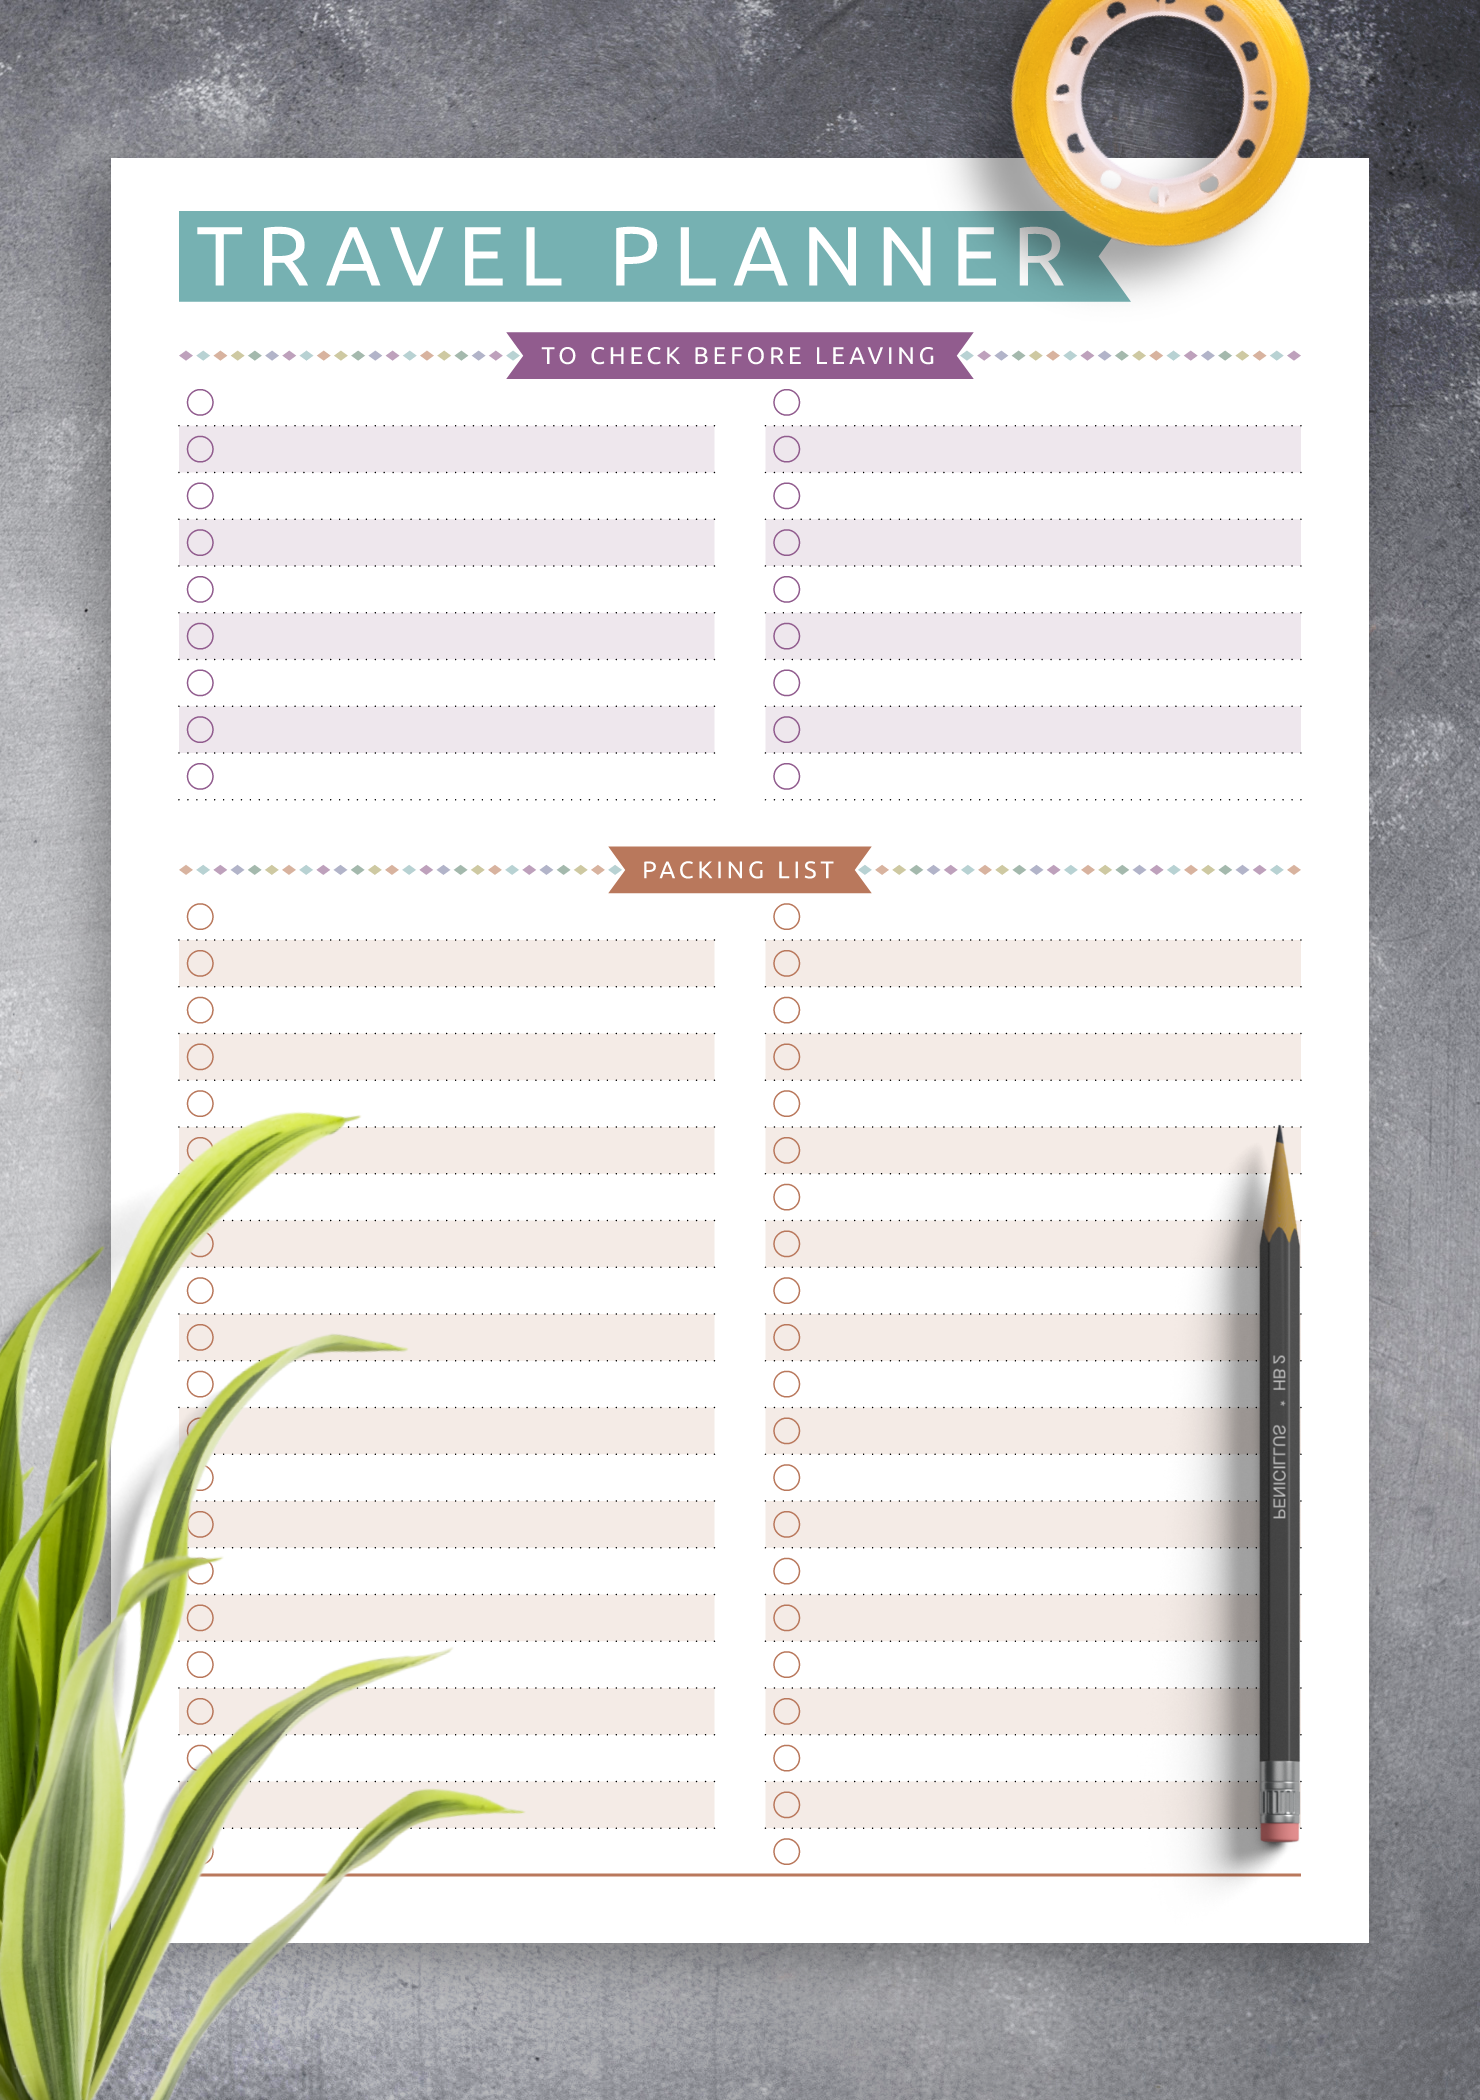 Download Printable Packing List - Casual Style PDF